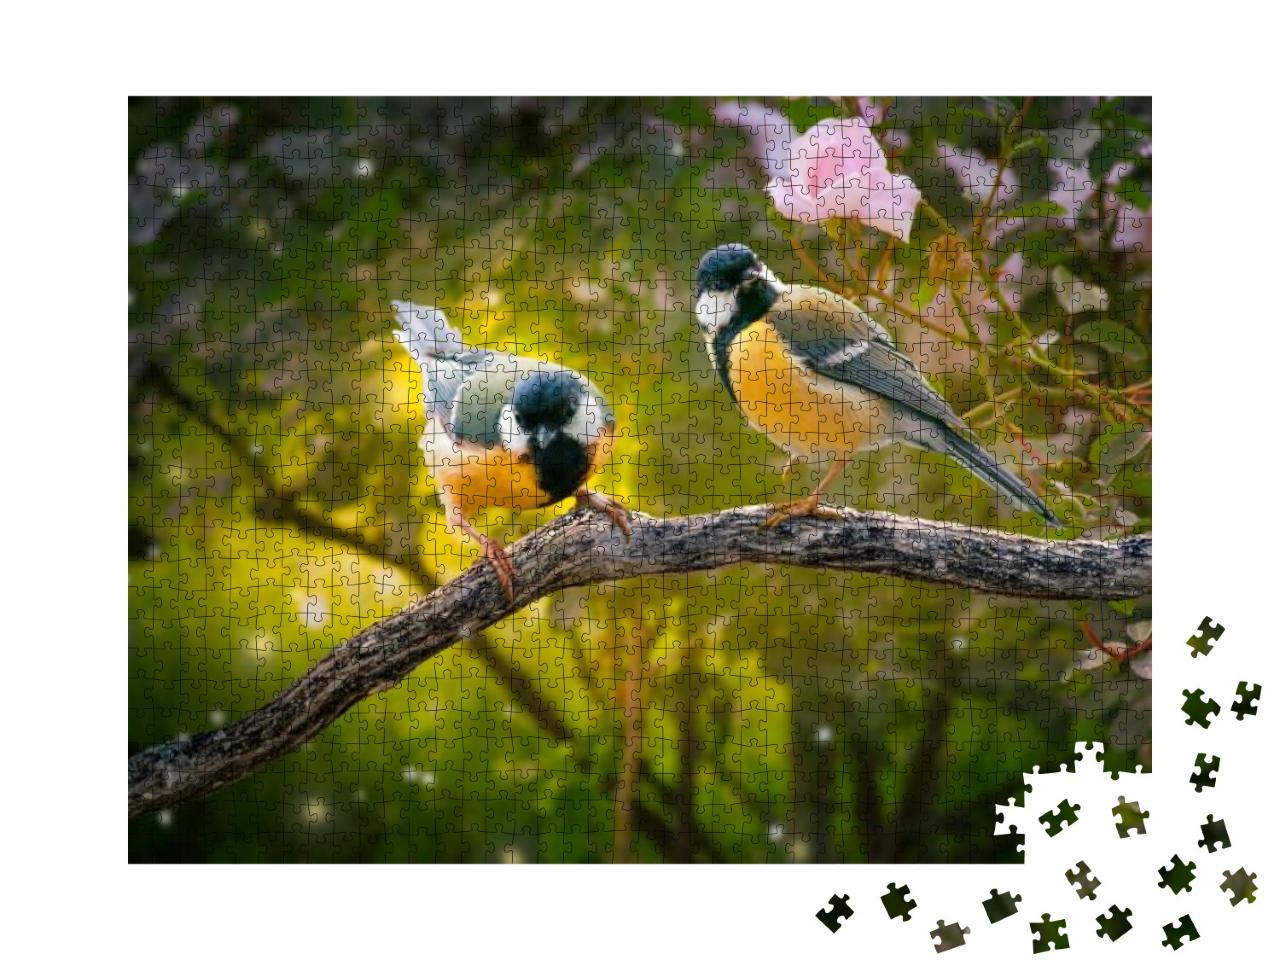 Fantasy Portrait of Two Tit Birds Sitting on Tree Branch... Jigsaw Puzzle with 1000 pieces